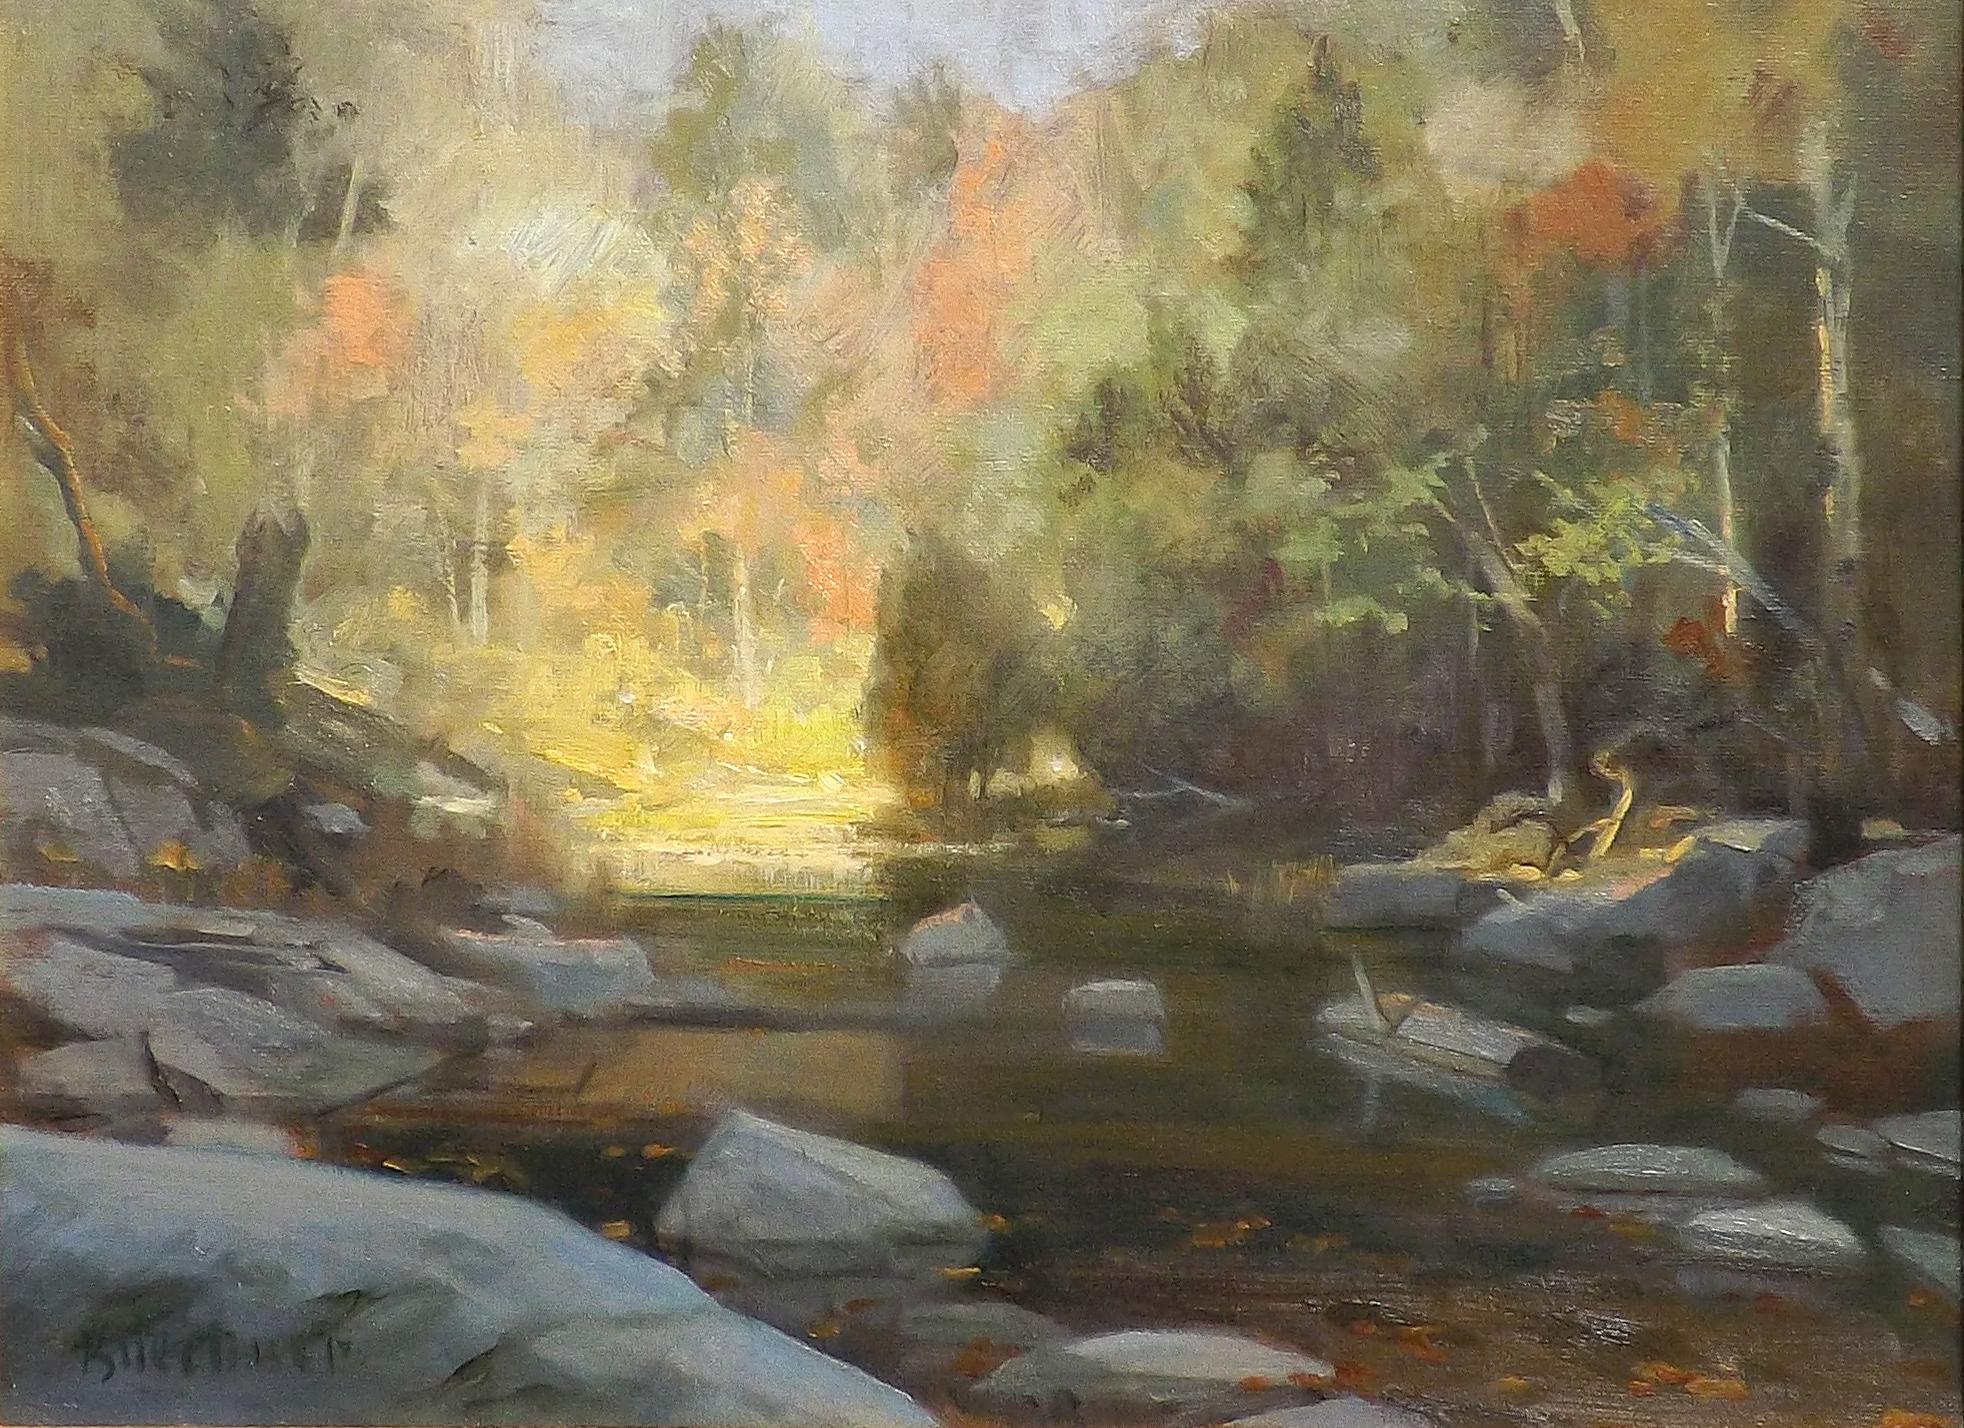 A wonderfully painted scene of a lazy stream flowing through a wooded landscape, the touch of autumn apparent in the trees. Early fallen leaves float gently in the shadow while an opening in the canopy allows the fall sunlight to illuminate the